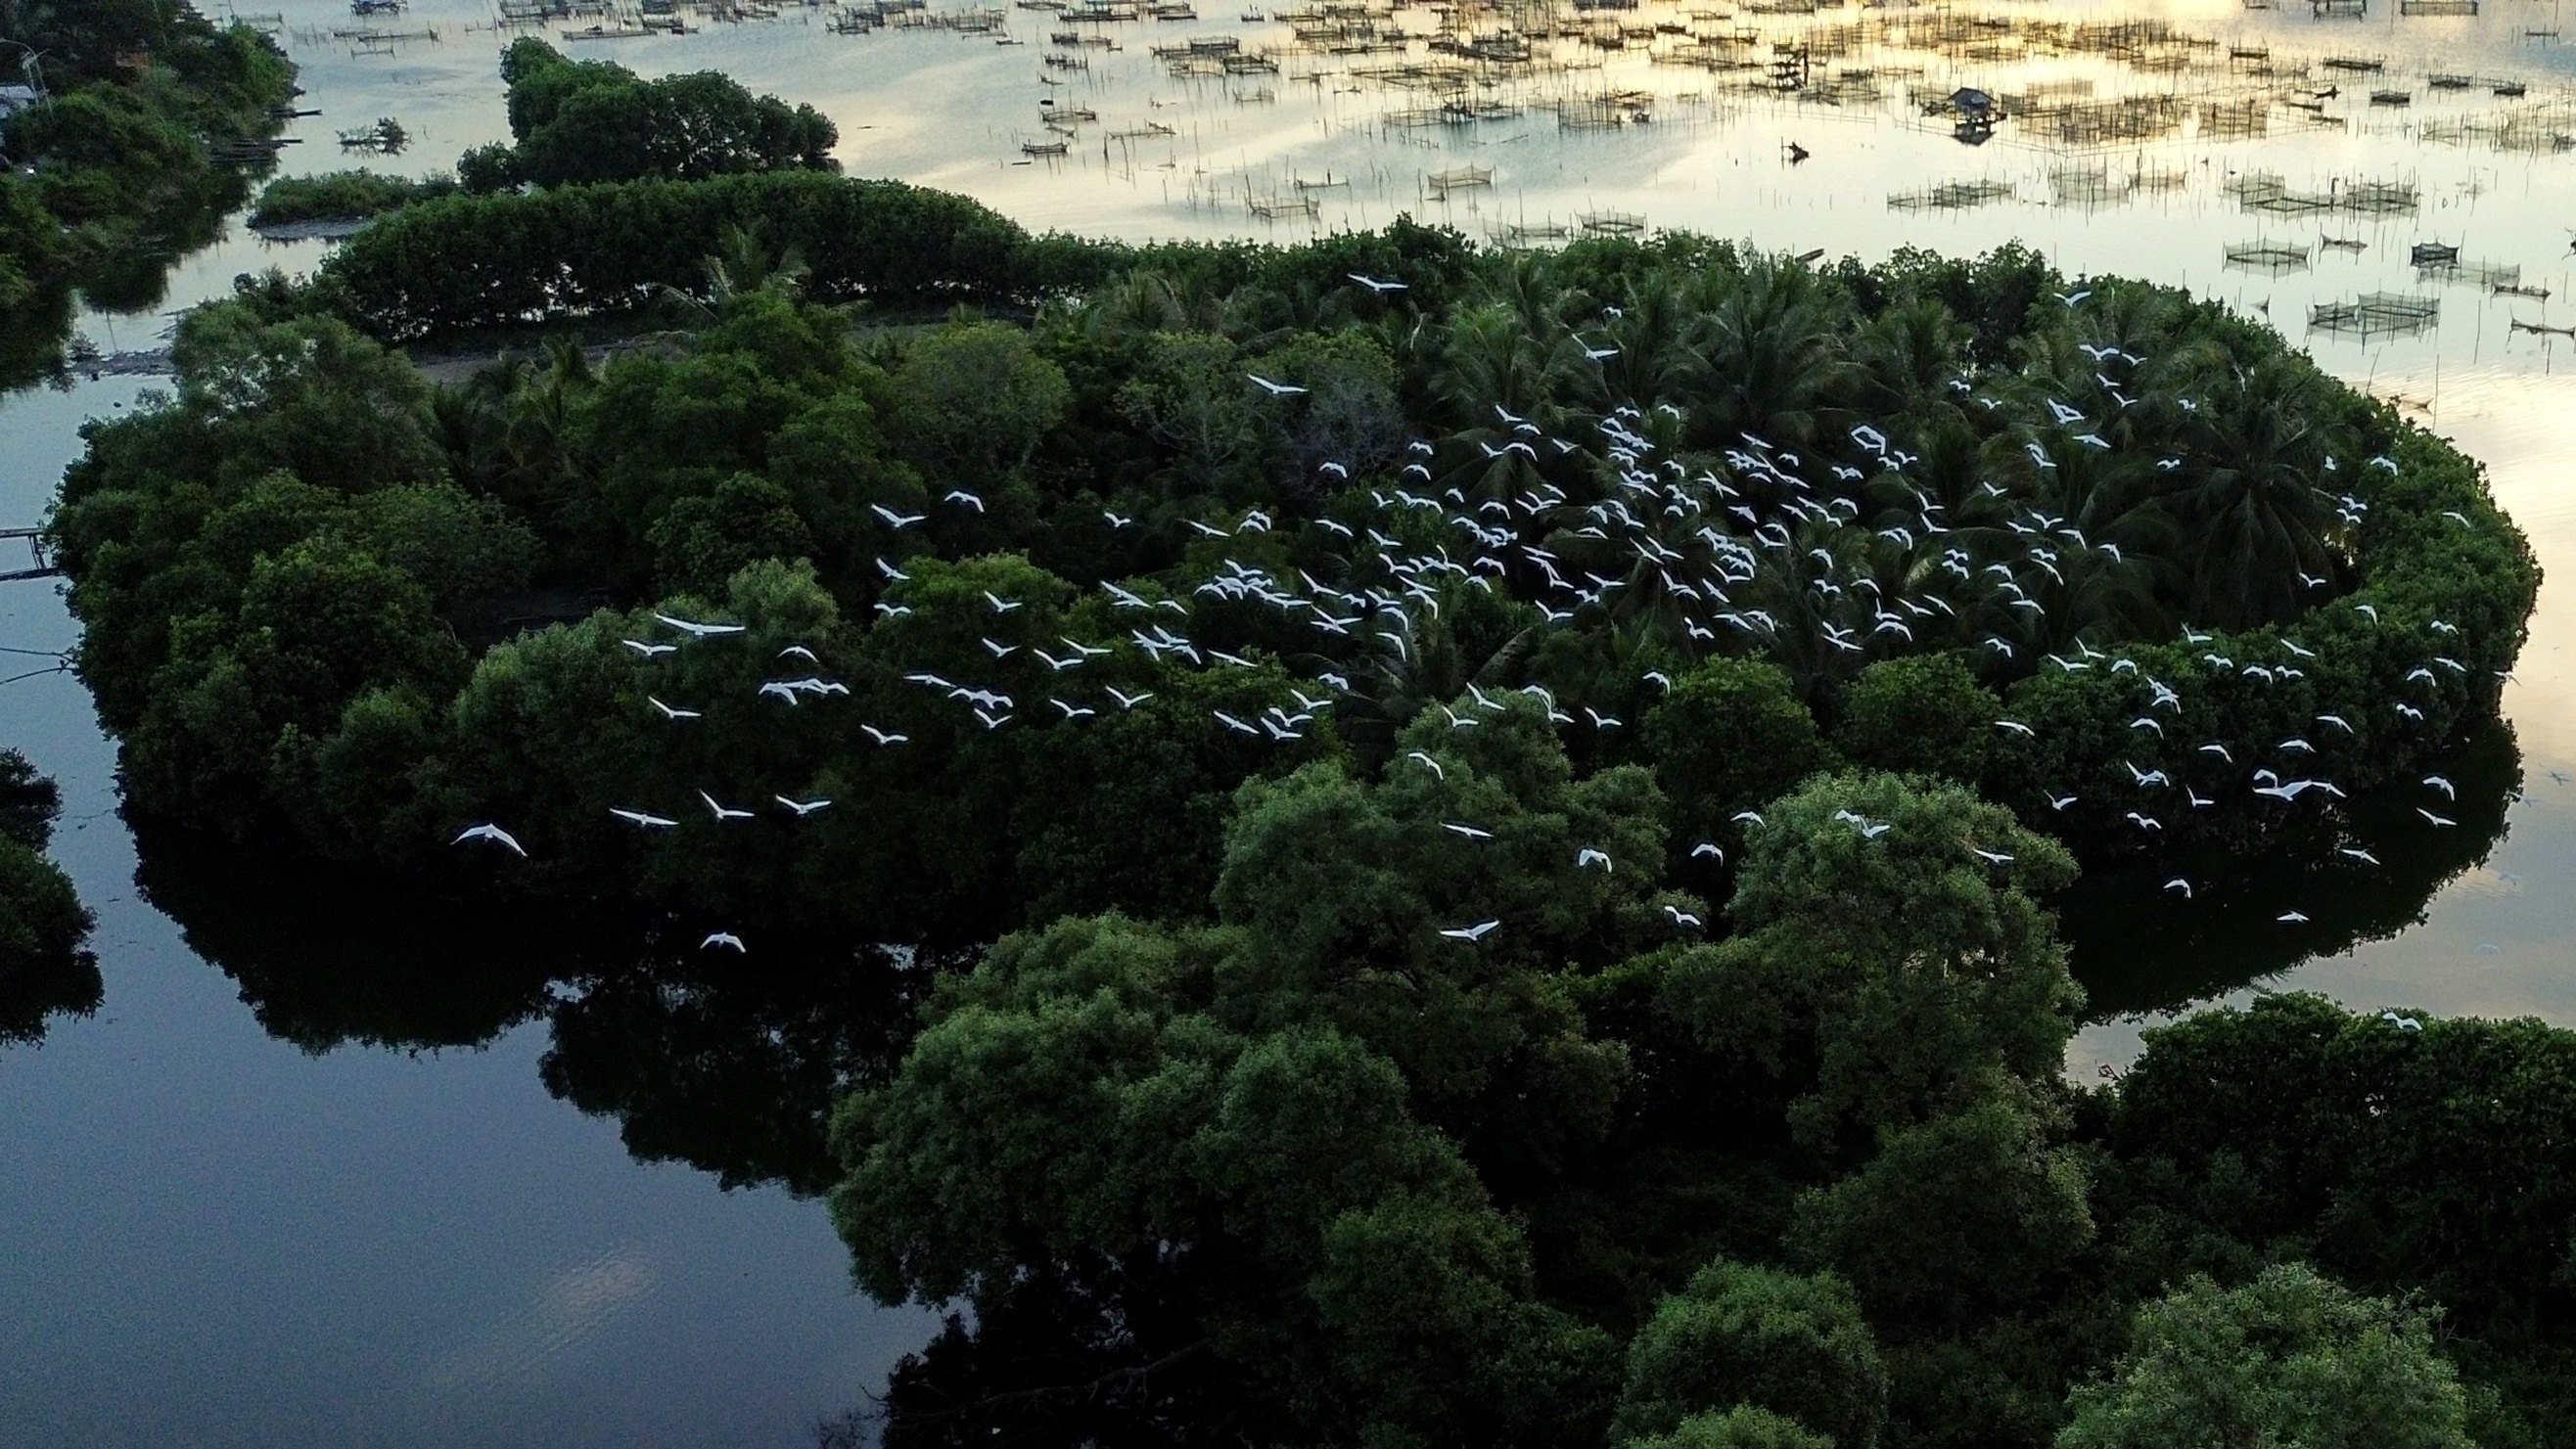 Egrets fly over mangroves in Lhokseumawe, Aceh Province, in Indonesia, on January 10. About 20 per cent of the world’s mangrove forests are located in Indonesia. Photo: Xinhua